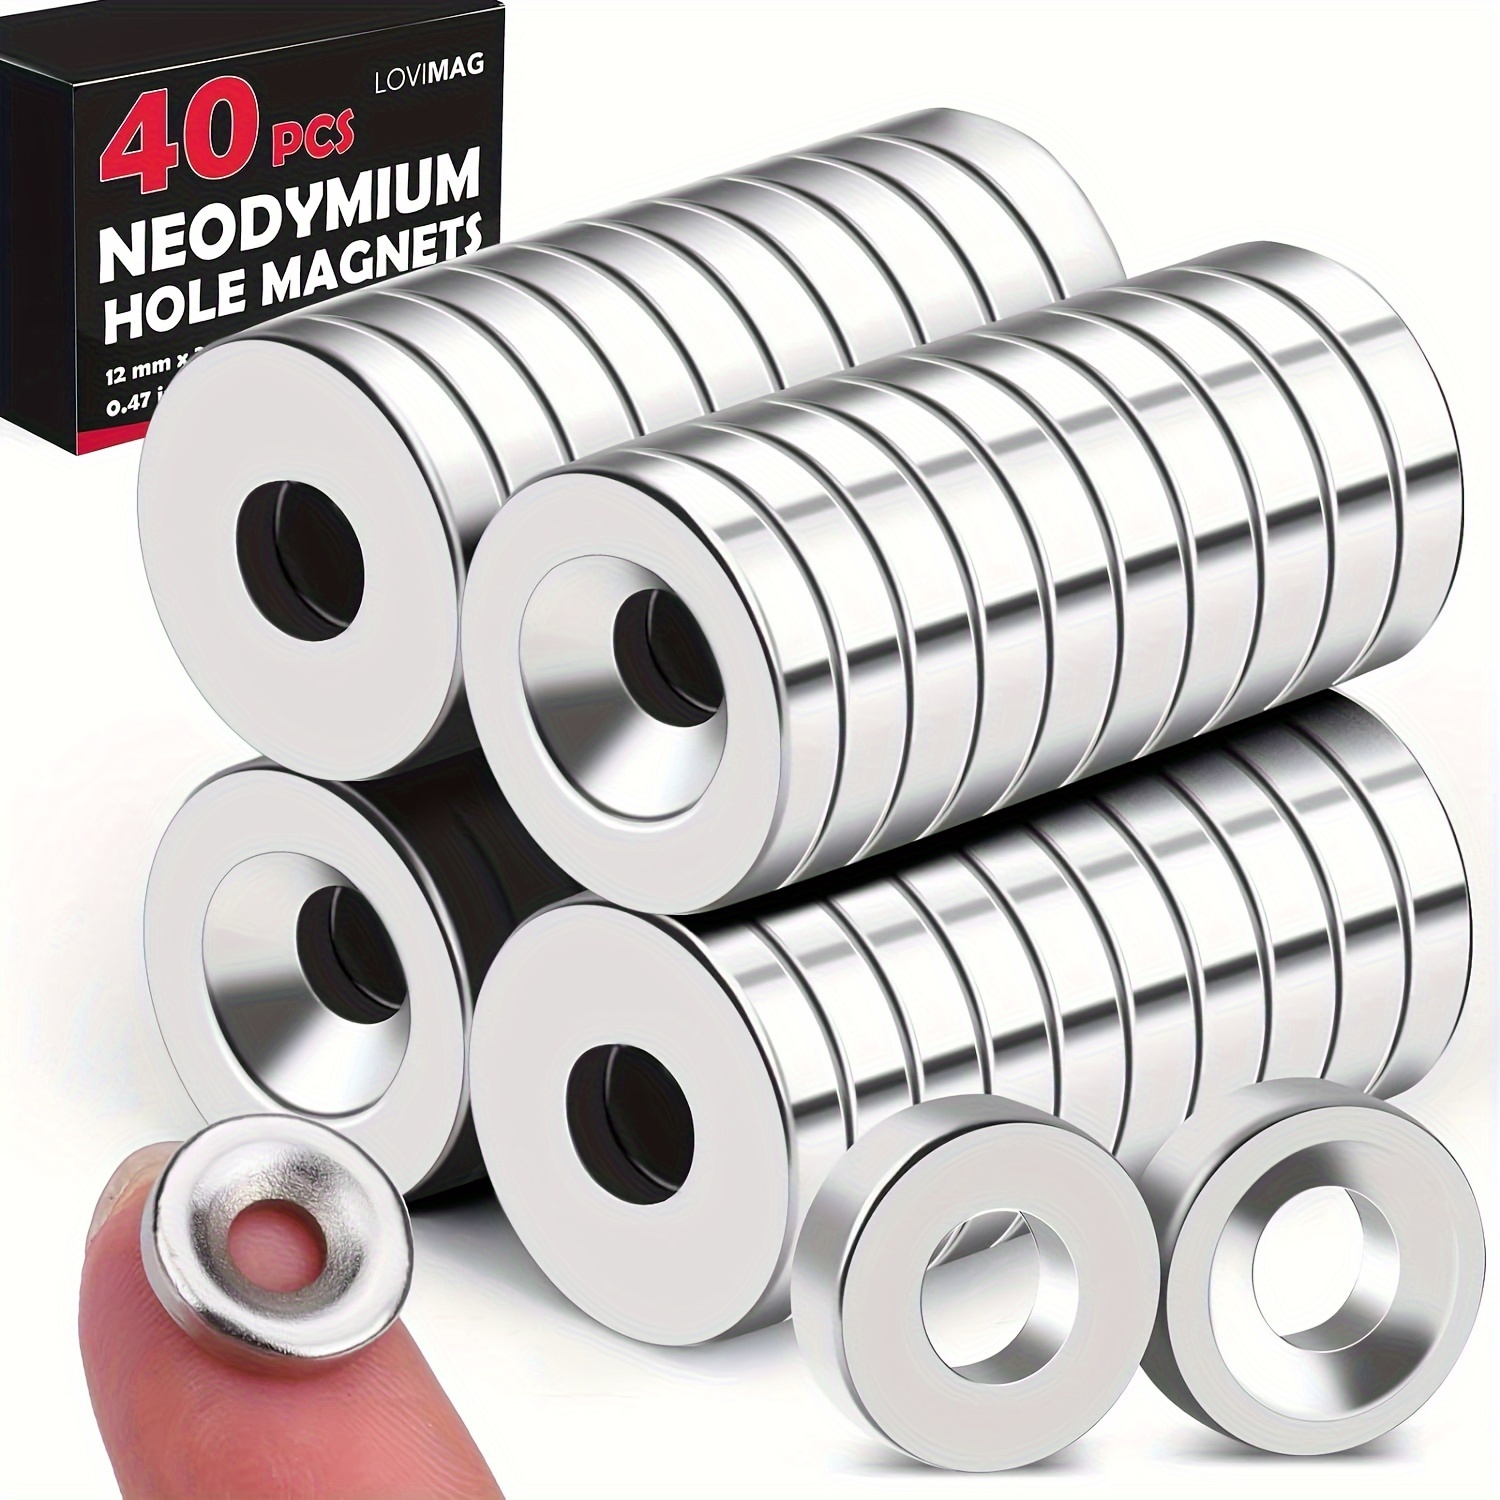 30pcs Super Strong Neodymium Magnets, 7X2mm Small Disk Magnets,  Multi-function Round Magnets, Ideal For Refrigerator, Whiteboard, Office,  Home Kitchen